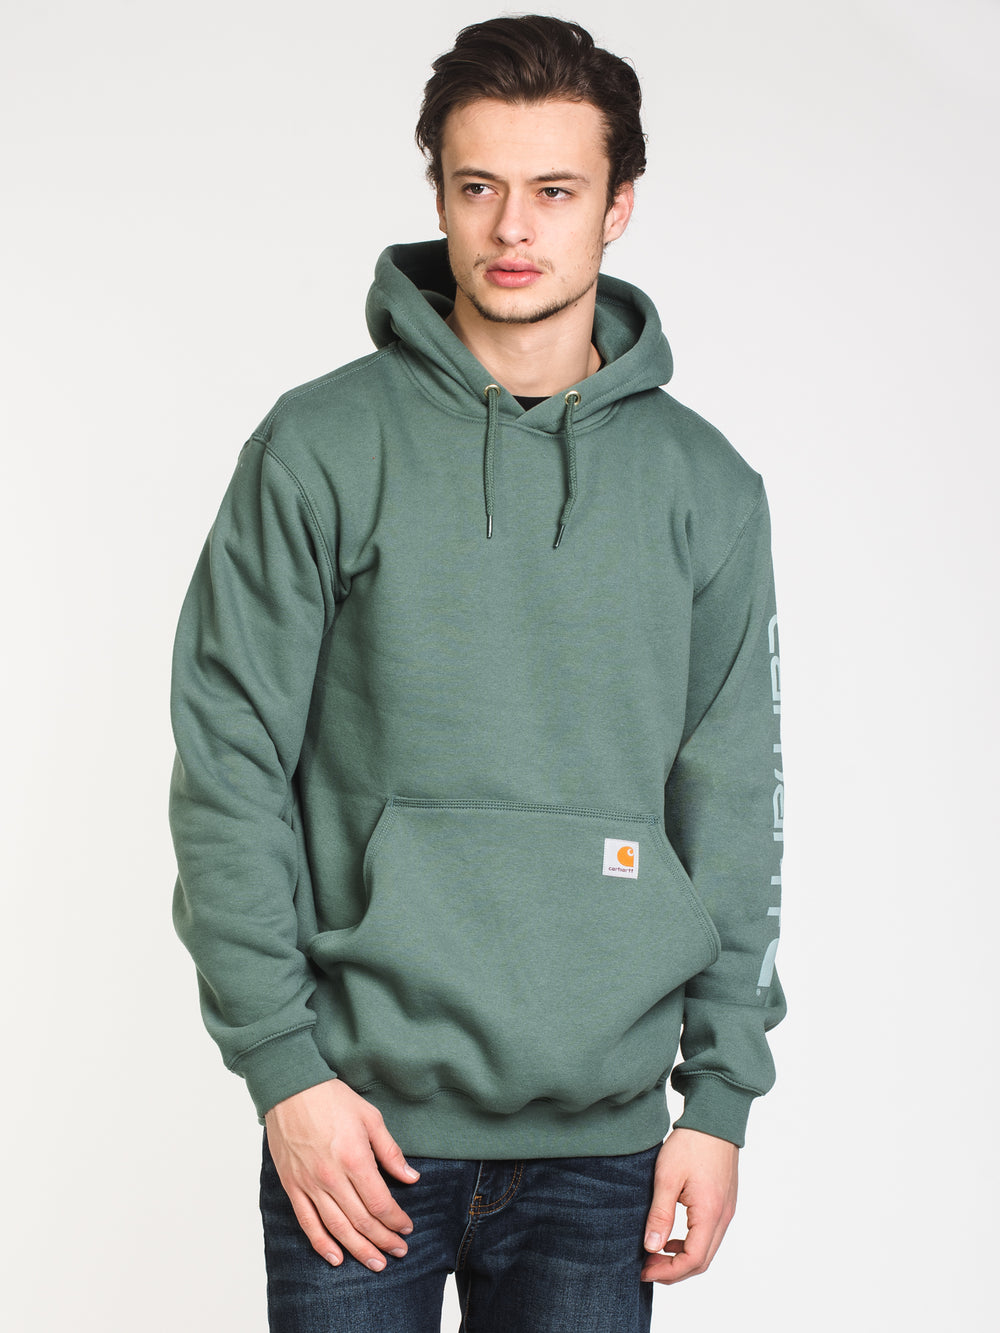 MENS CARHARTT SLV PULLOVER HOODIE - GREEN - CLEARANCE